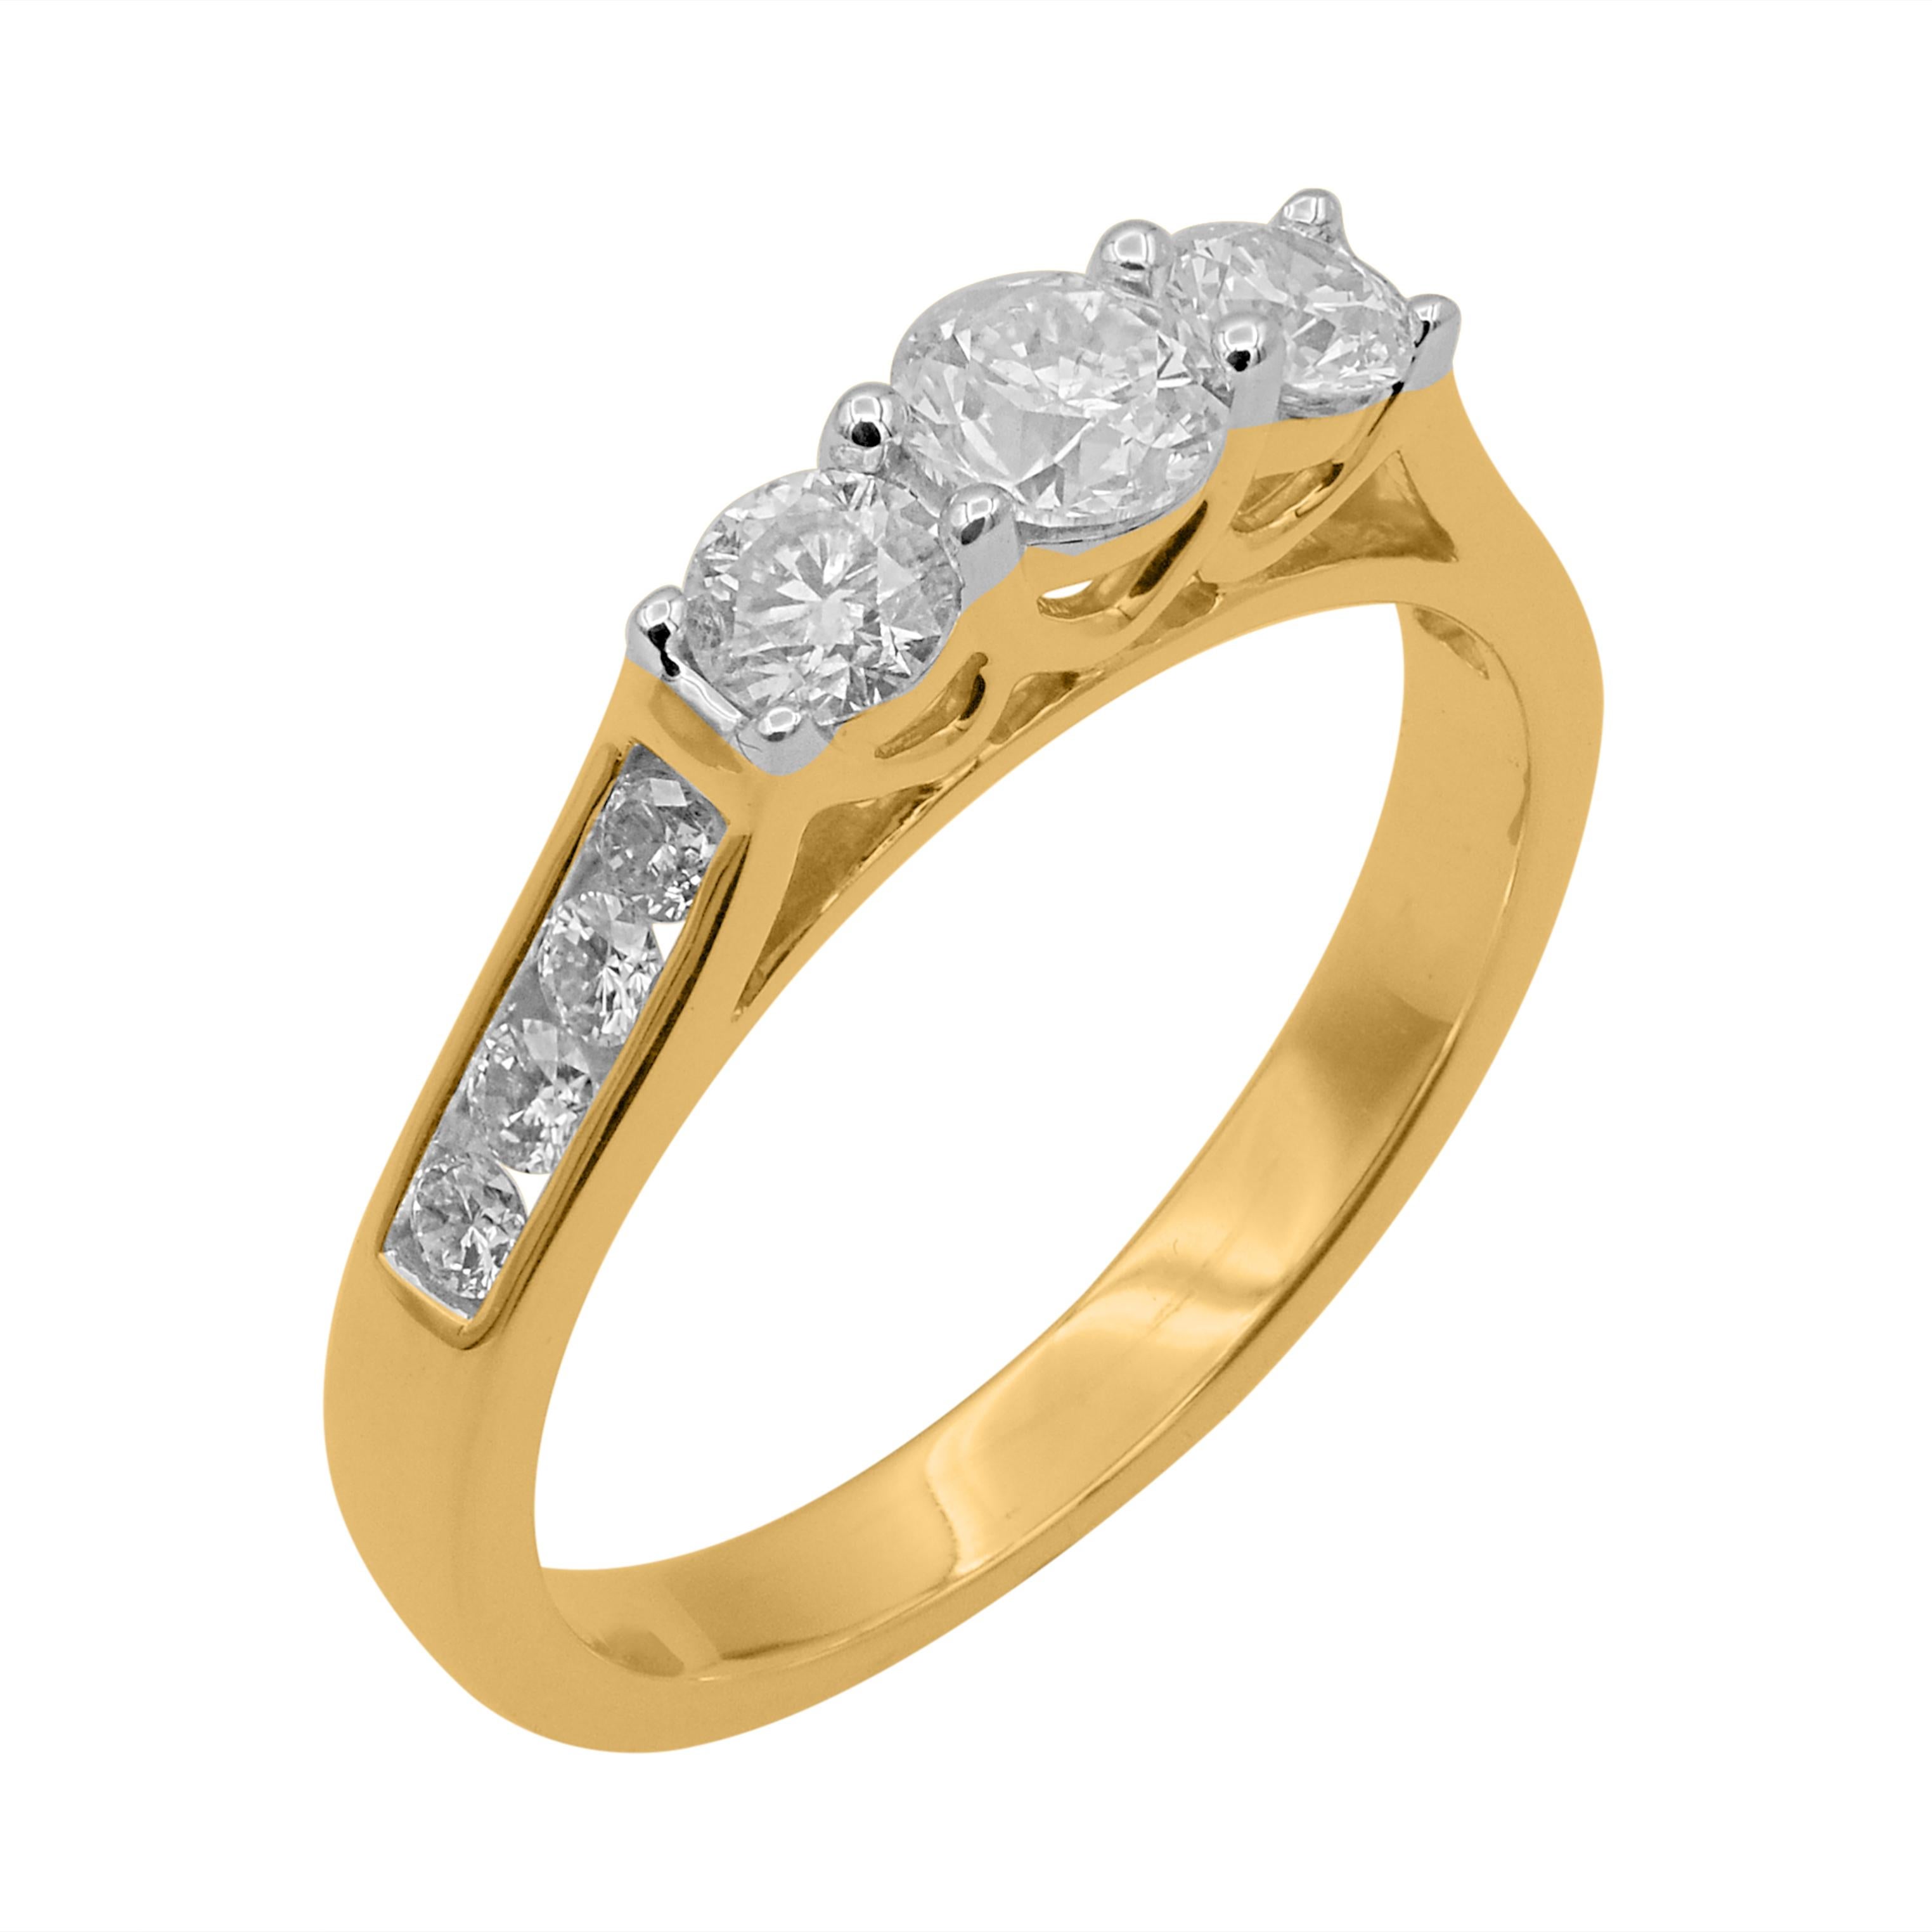 Beautifully, with a classic three stone diamond ring. These engagement ring are studded with 11 brilliant cut round diamonds in prong & channel setting. Ring is crafted in 18kt yellow gold. The white diamonds are graded as H-I color and I-2 clarity.
